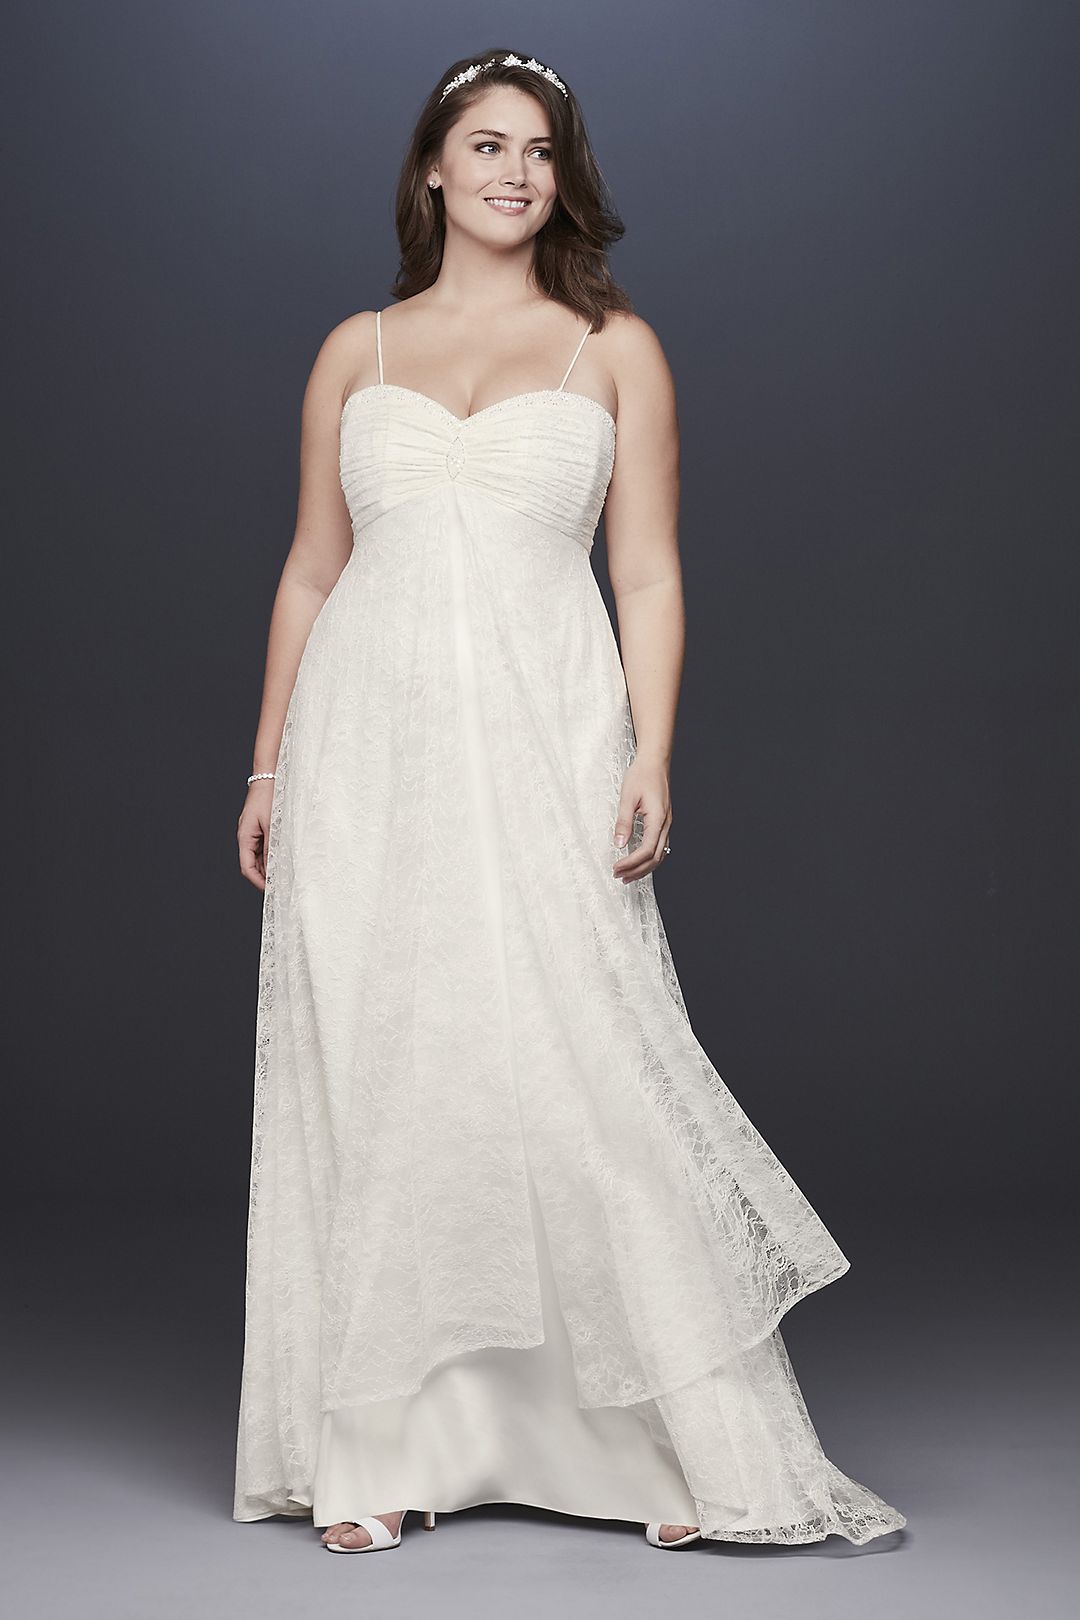 Pleated Plus Size Wedding Dress with Lace Overlay Image 1